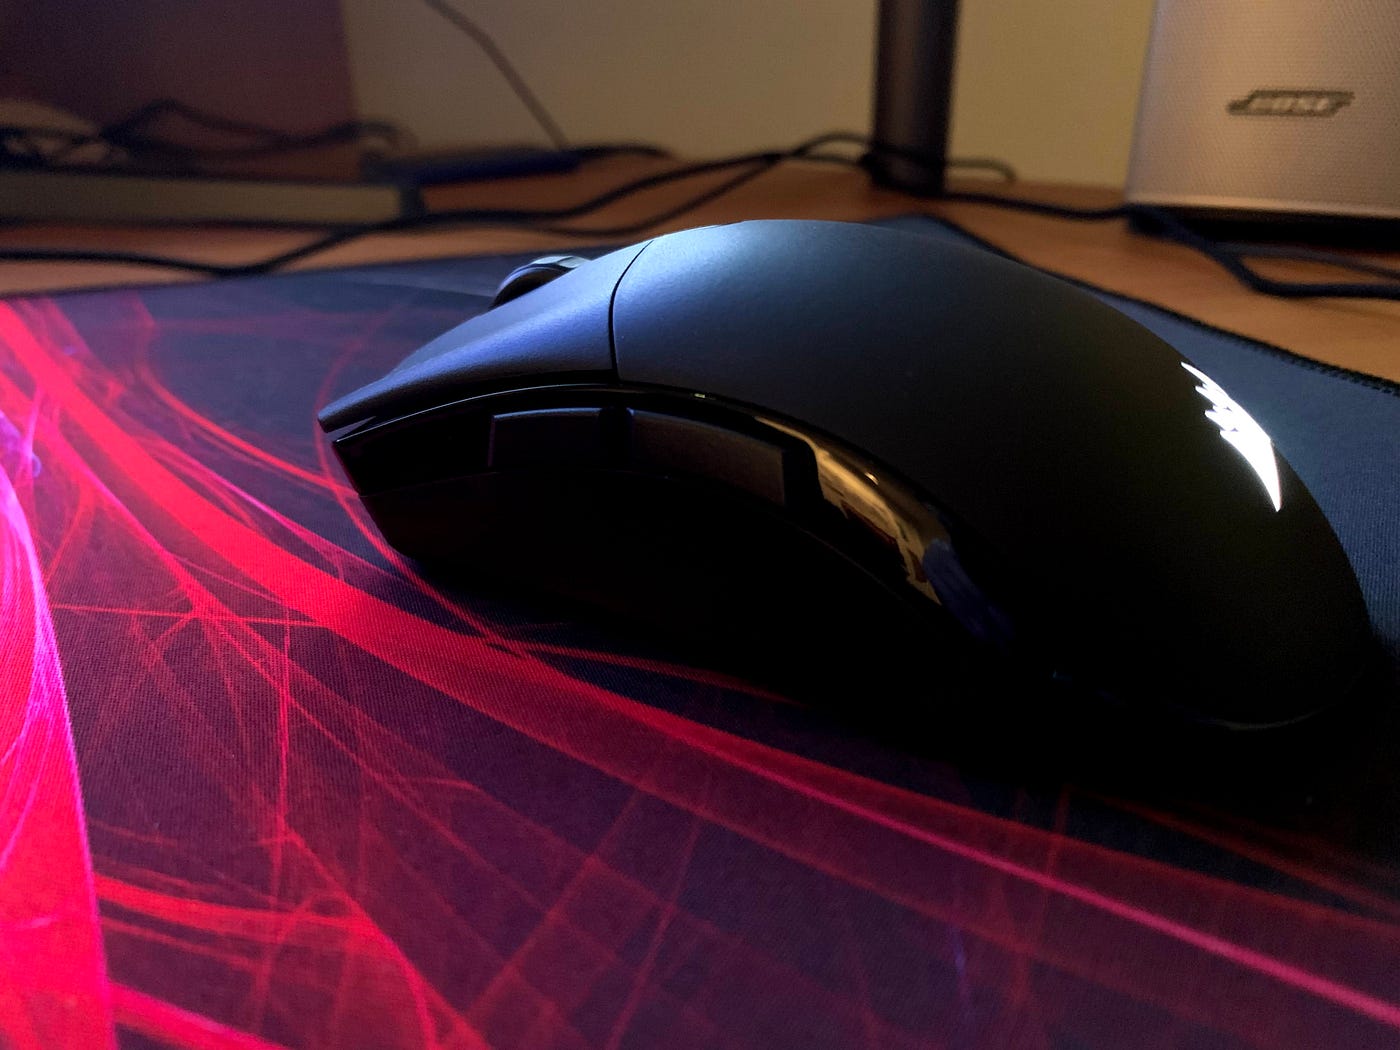 Corsair RGB Pro Wireless Gaming Mouse by Alex Rowe |